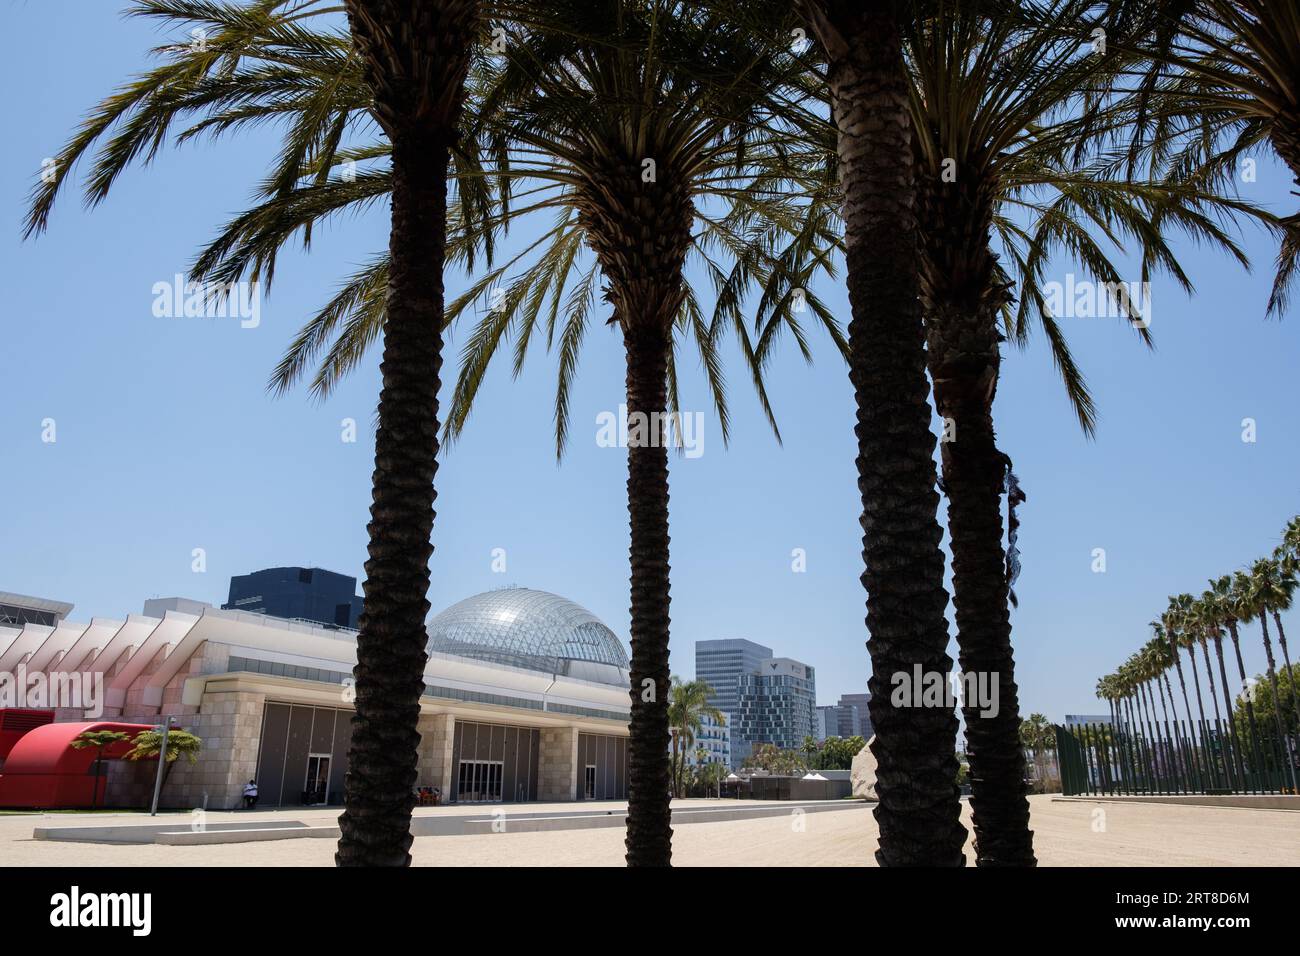 Palm trees in exterior view of the Los Angeles County Museum of Art (LACMA). Stock Photo